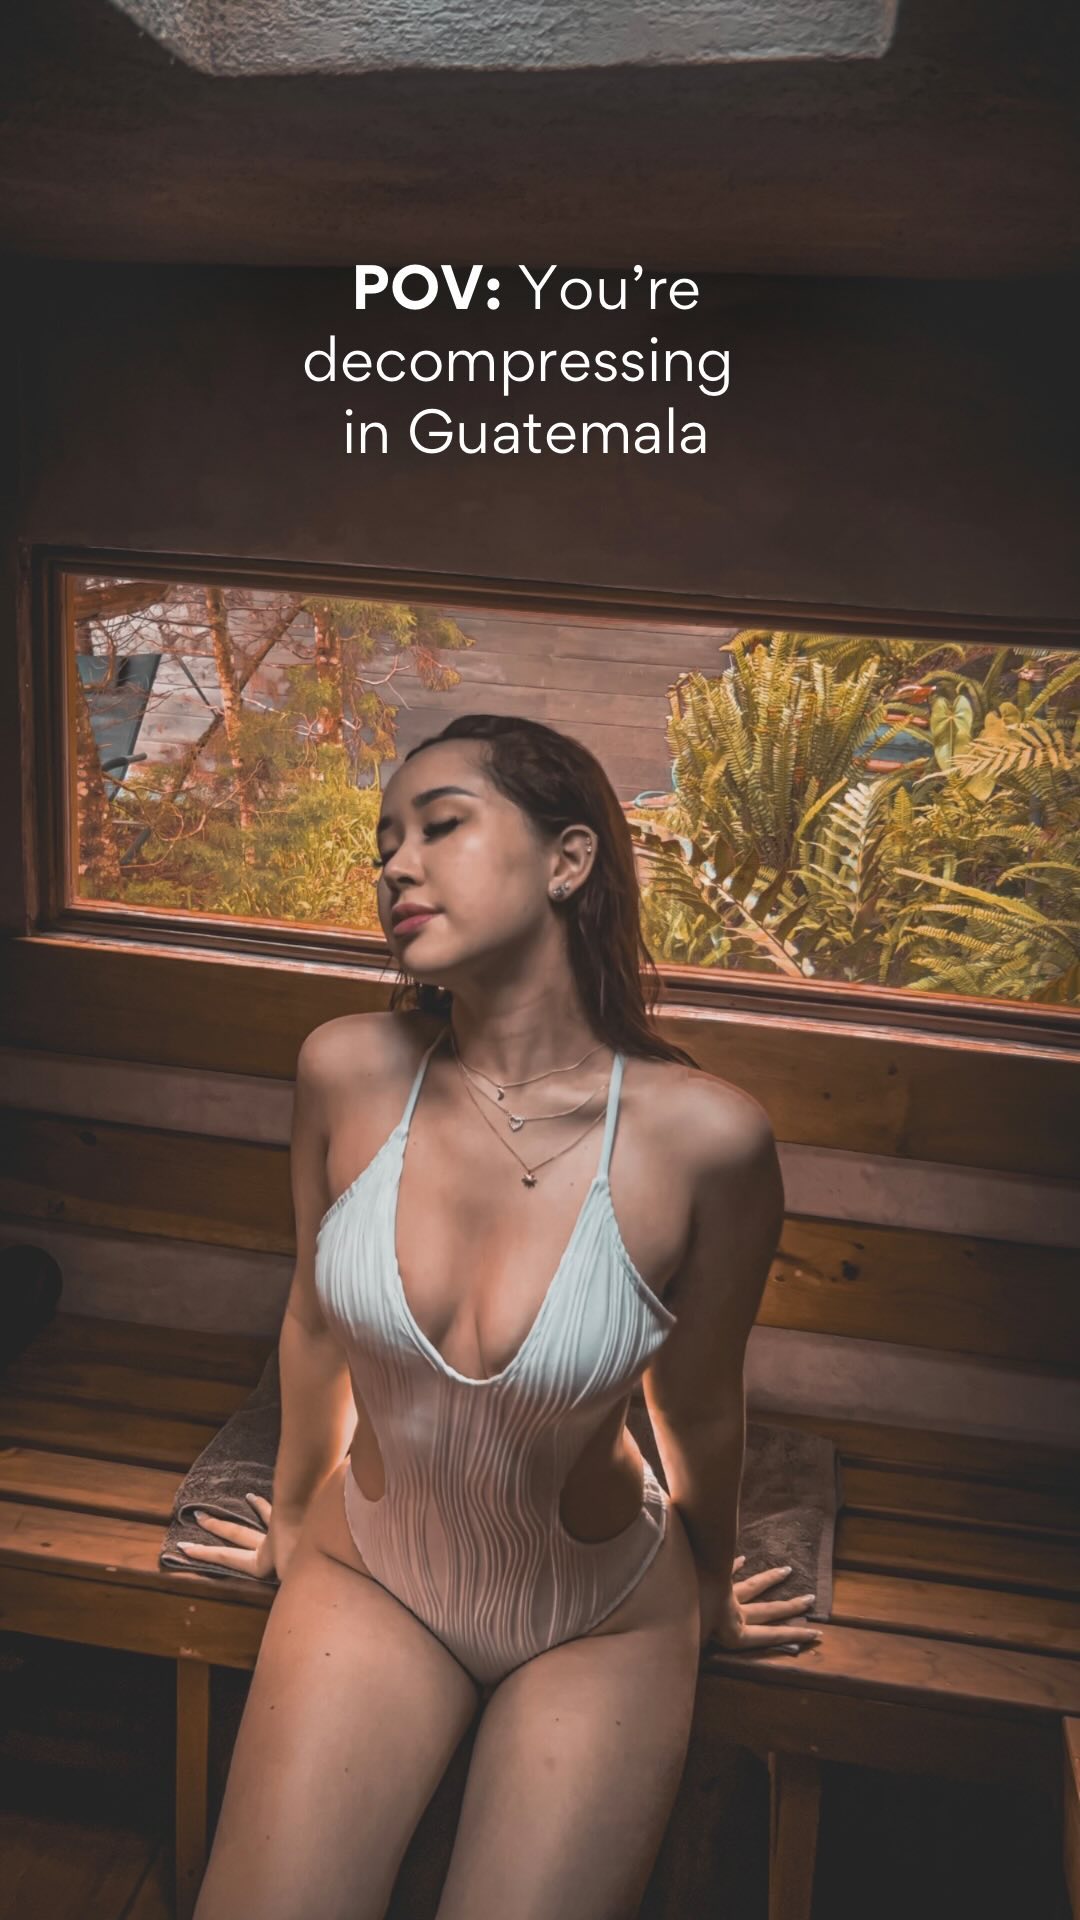 POV: You’re decompressing in Guatemala 🇬🇹 

Forget the winter cold 🥶, this year I’m celebrating holidays 🎄 in the arms o